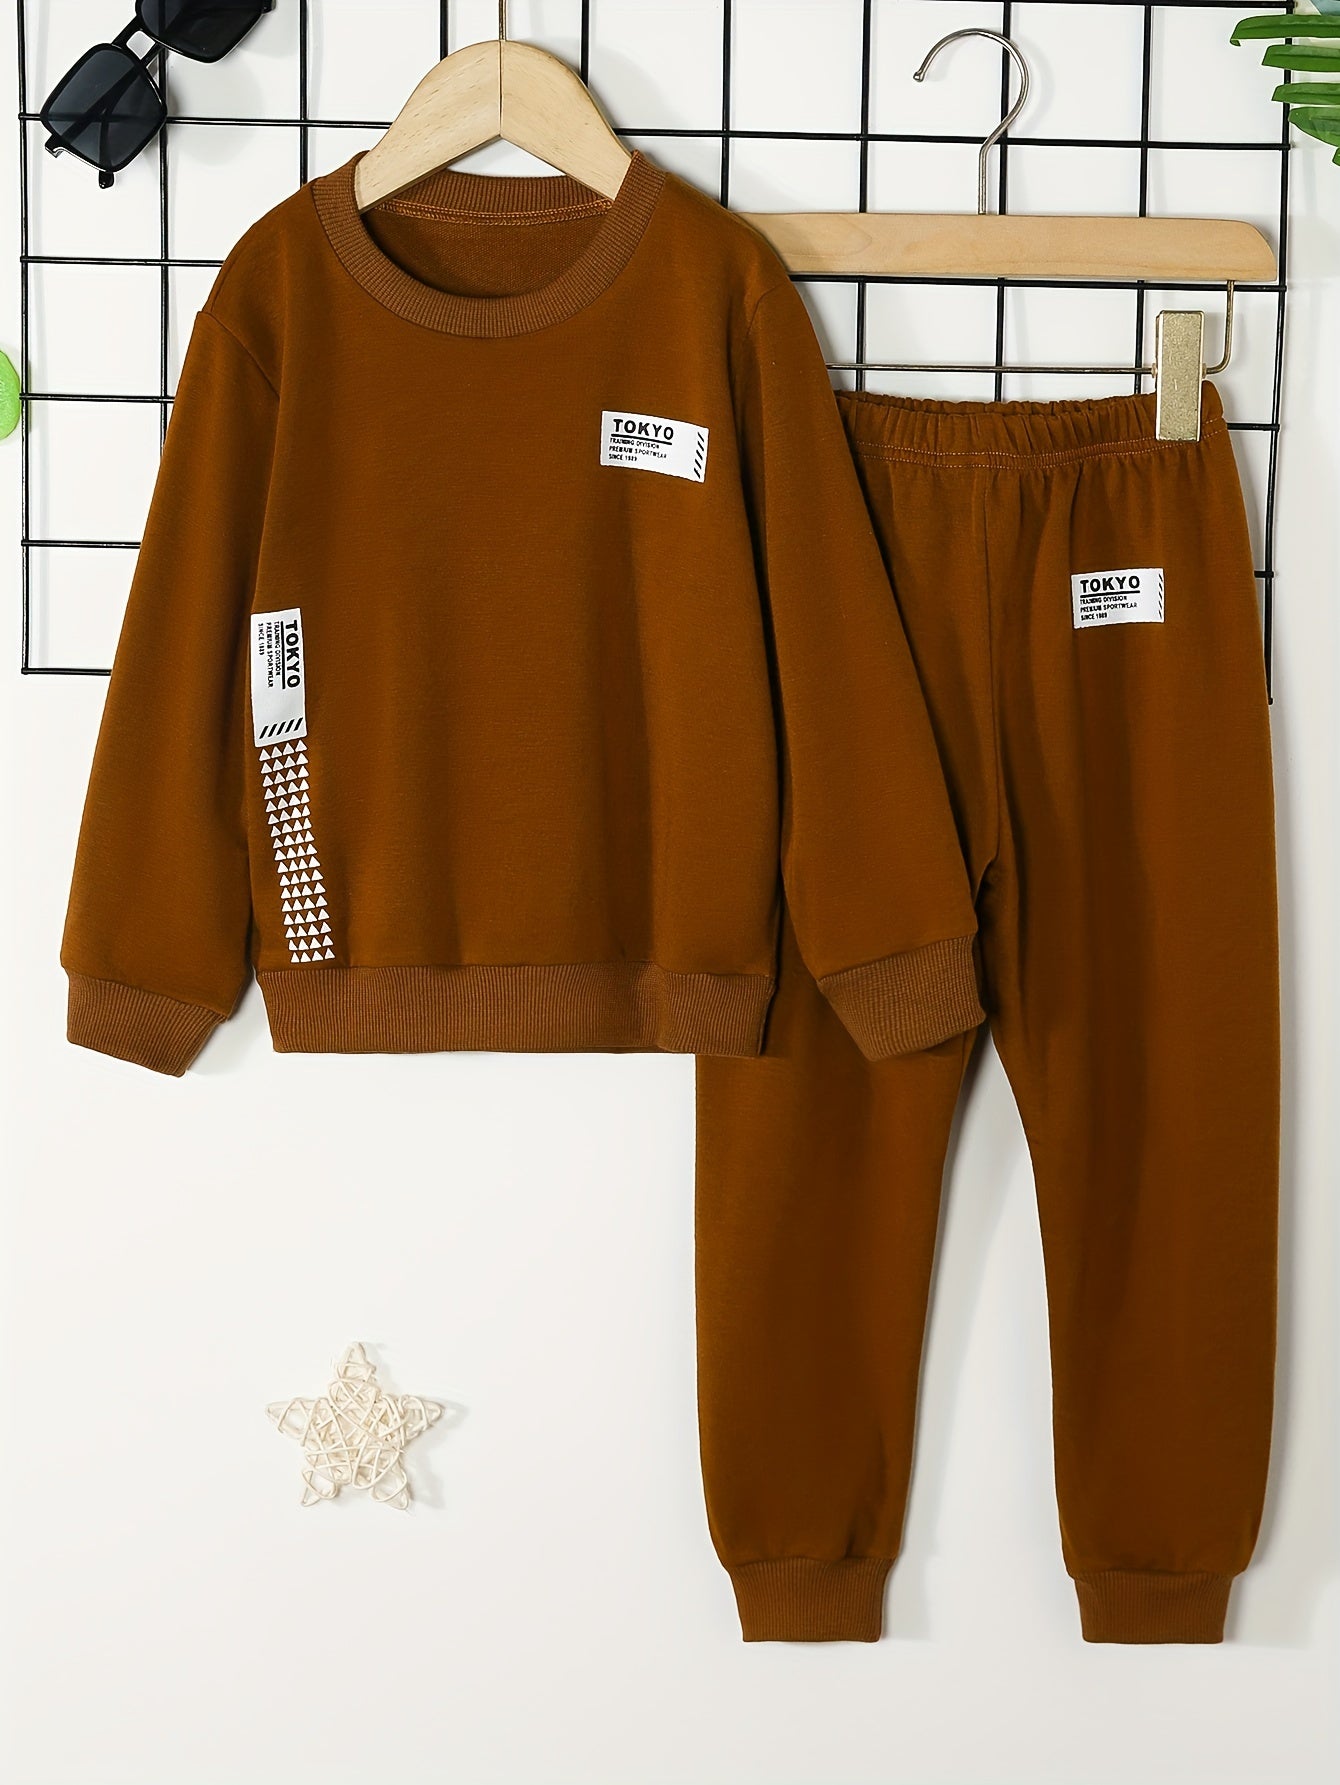 Boy's Trendy 2pcs, Sweatshirt & Sweatpants Set, TOKYO Print Long Sleeve Top, Casual Outfits, Kids Clothes For Spring Fall